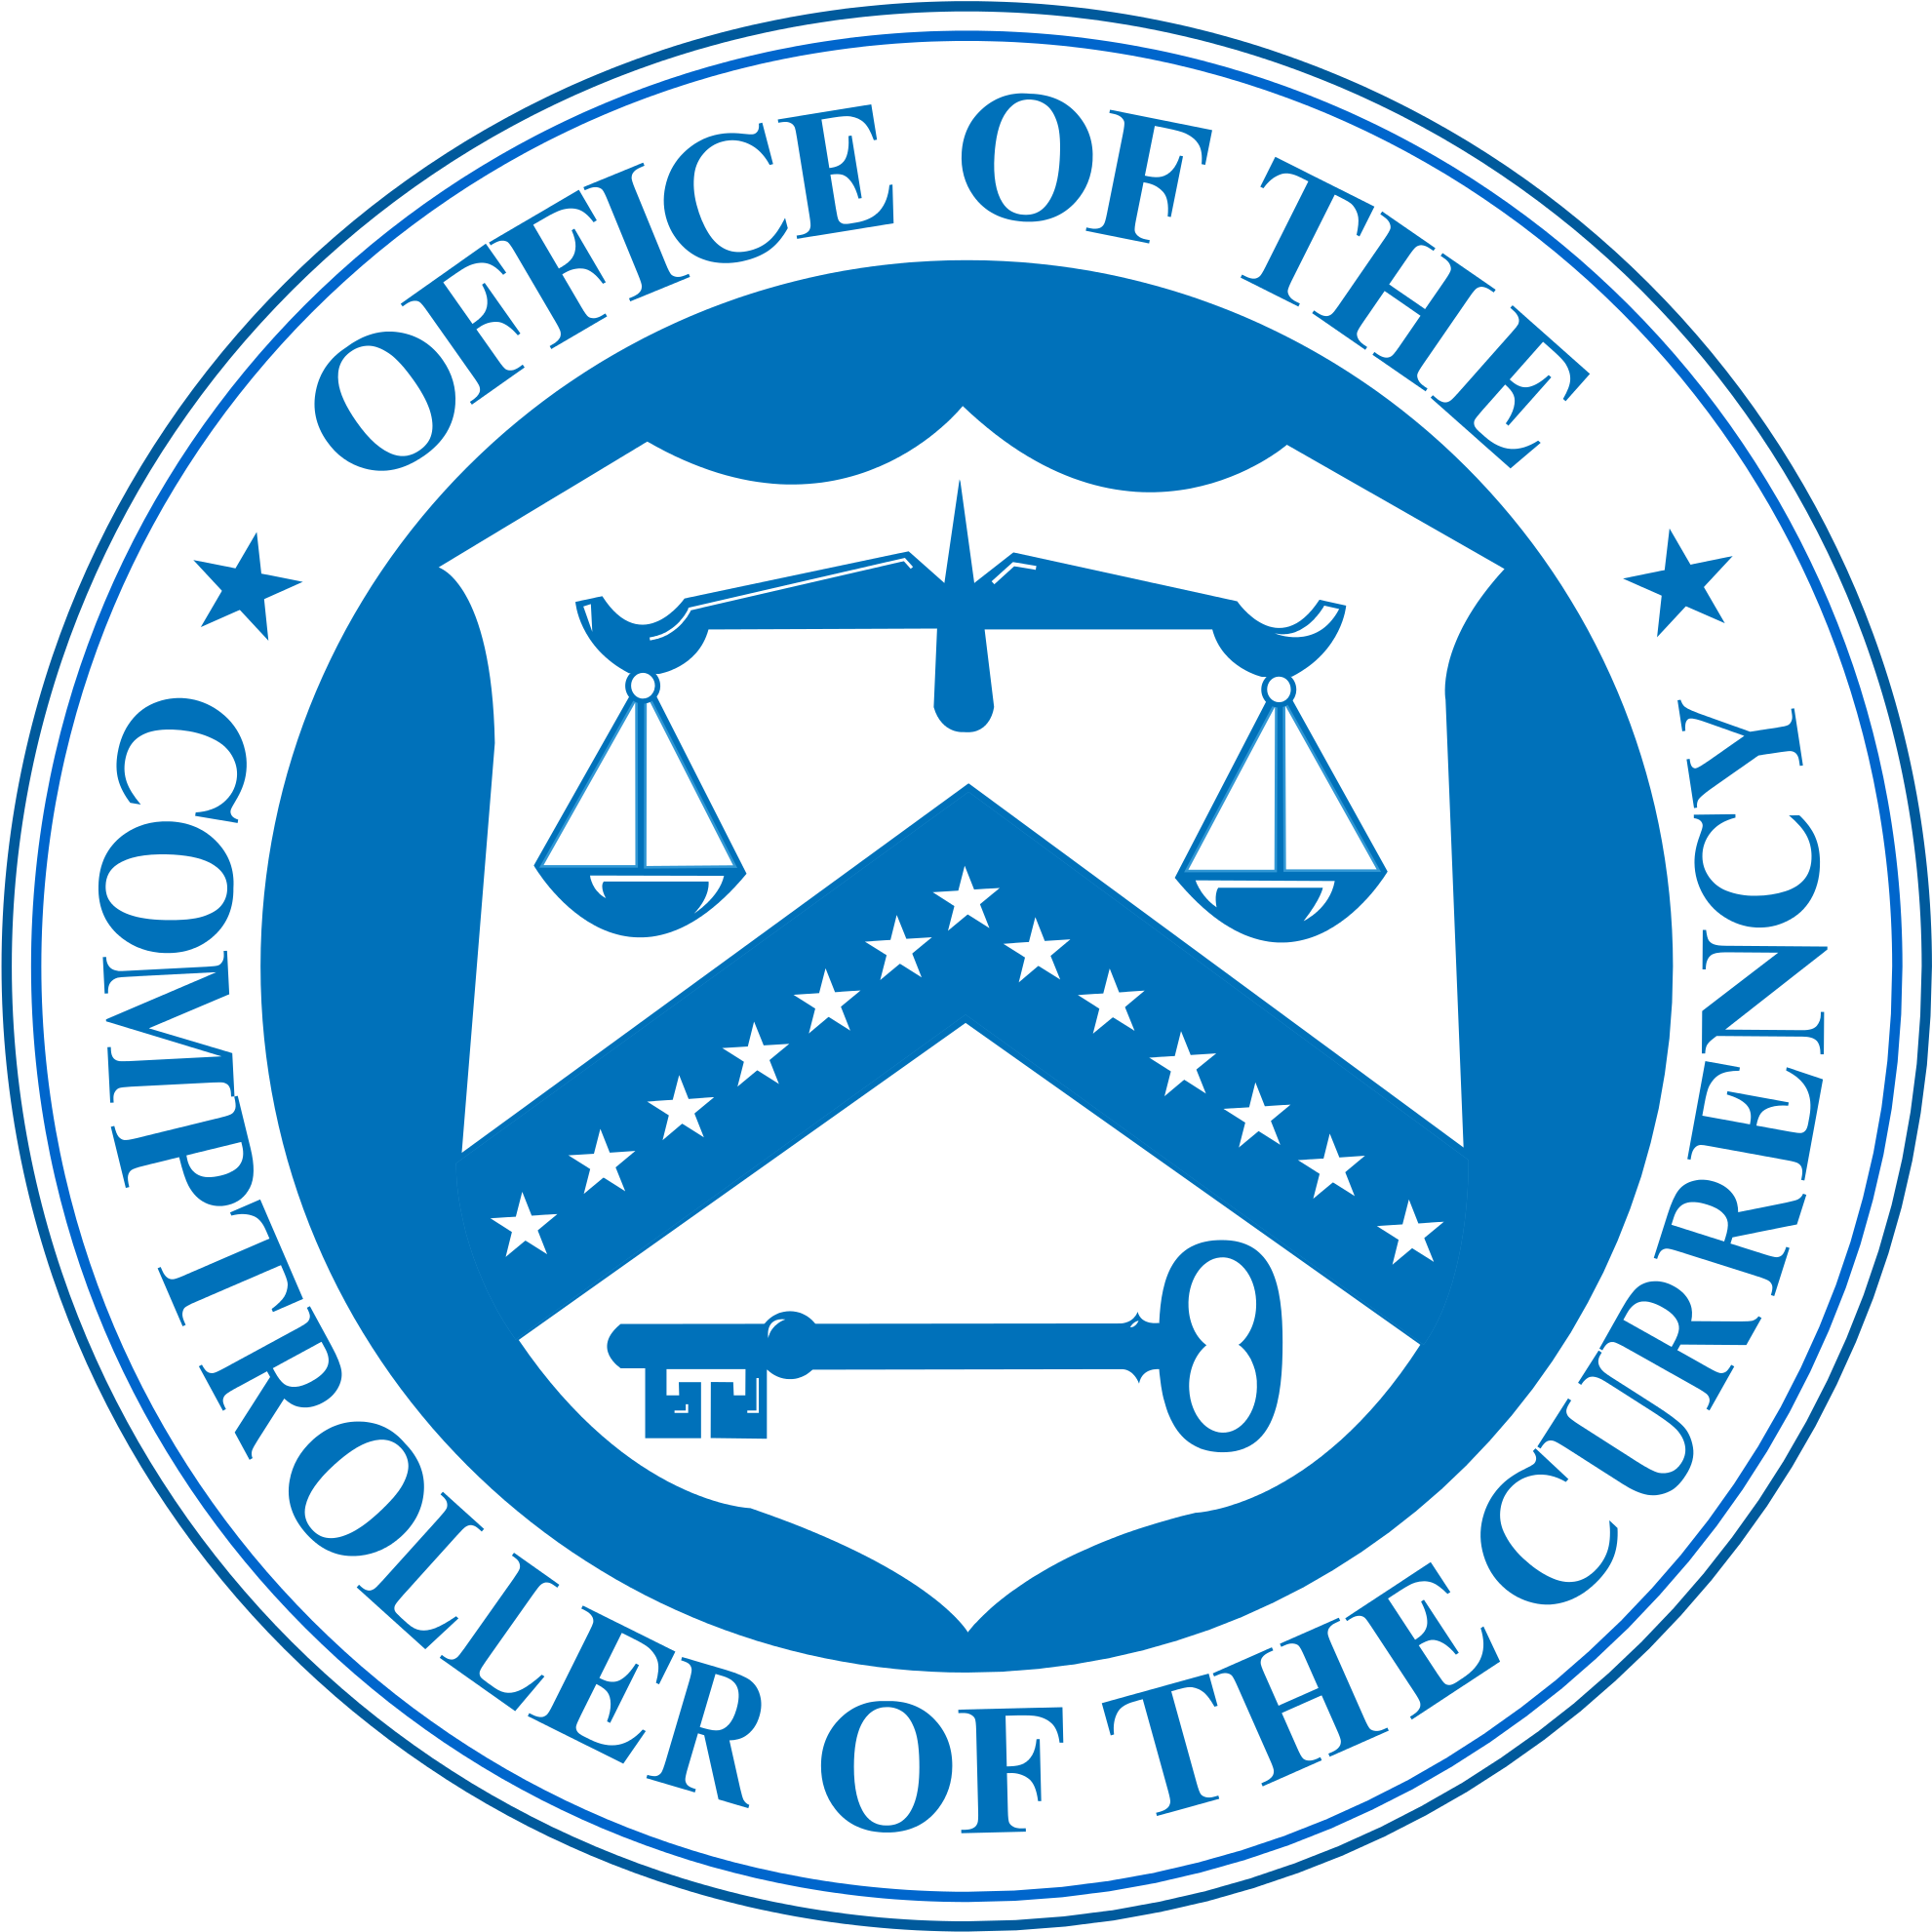 The Building Is Also Occupied By Federal Trade Commission, - Office Of The Comptroller Of The Currency (2000x2000)